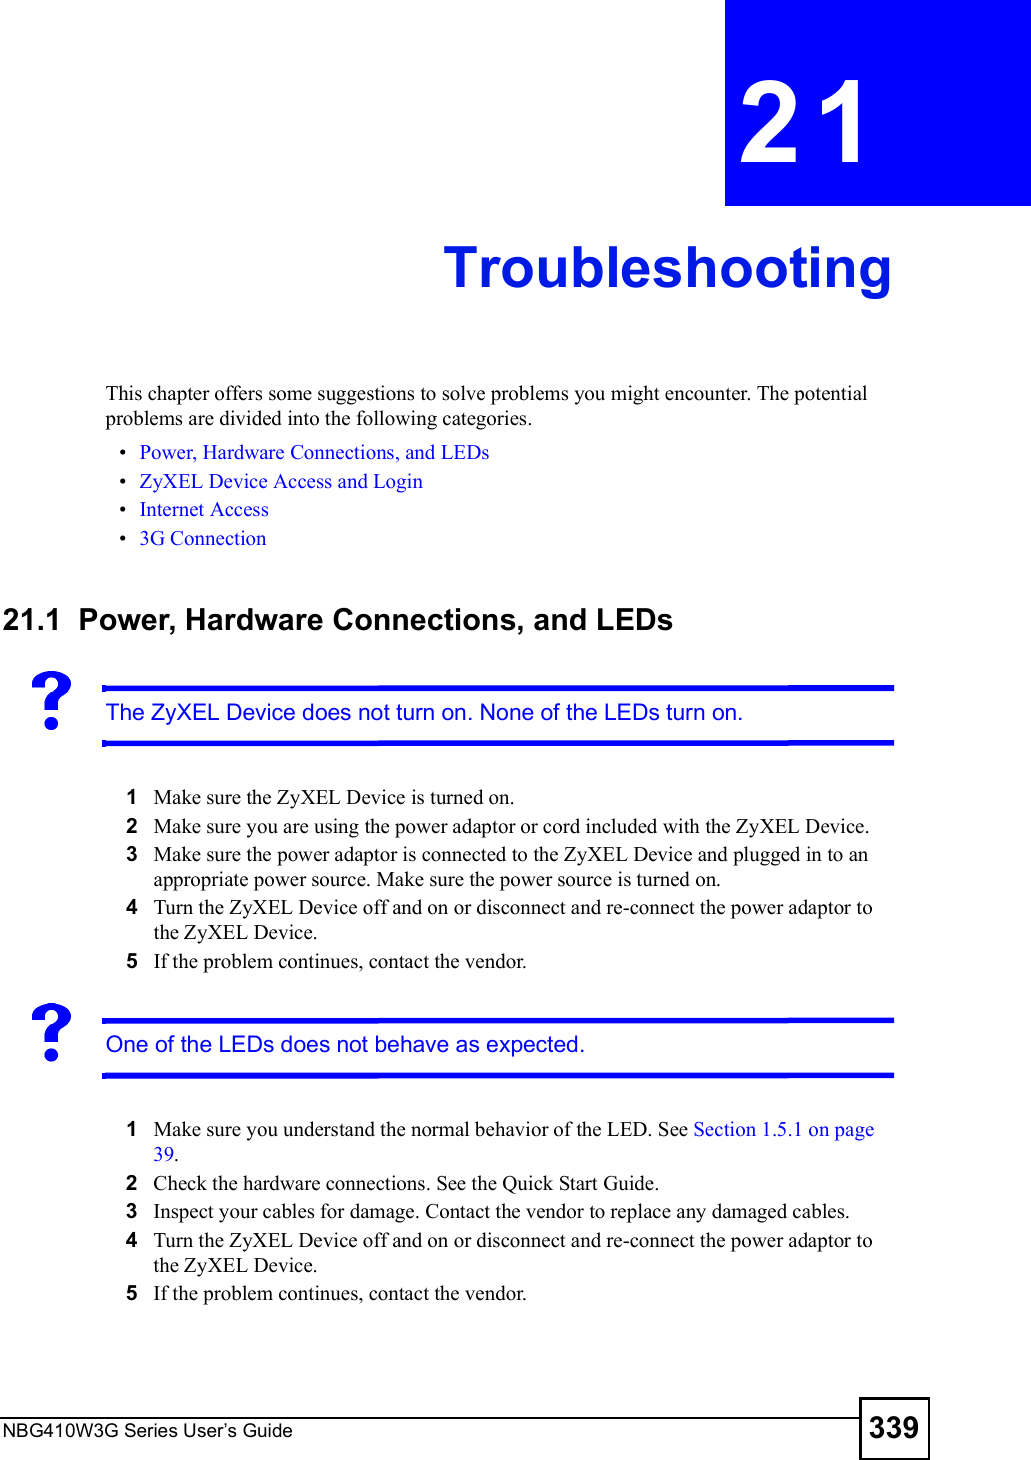 NBG410W3G Series User s Guide 339CHAPTER  21 TroubleshootingThis chapter offers some suggestions to solve problems you might encounter. The potential problems are divided into the following categories.  Power, Hardware Connections, and LEDs ZyXEL Device Access and Login Internet Access 3G Connection21.1  Power, Hardware Connections, and LEDsThe ZyXEL Device does not turn on. None of the LEDs turn on.1Make sure the ZyXEL Device is turned on. 2Make sure you are using the power adaptor or cord included with the ZyXEL Device.3Make sure the power adaptor is connected to the ZyXEL Device and plugged in to an appropriate power source. Make sure the power source is turned on.4Turn the ZyXEL Device off and on or disconnect and re-connect the power adaptor to the ZyXEL Device. 5If the problem continues, contact the vendor.One of the LEDs does not behave as expected.1Make sure you understand the normal behavior of the LED. See Section 1.5.1 on page 39.2Check the hardware connections. See the Quick Start Guide. 3Inspect your cables for damage. Contact the vendor to replace any damaged cables.4Turn the ZyXEL Device off and on or disconnect and re-connect the power adaptor to the ZyXEL Device. 5If the problem continues, contact the vendor.